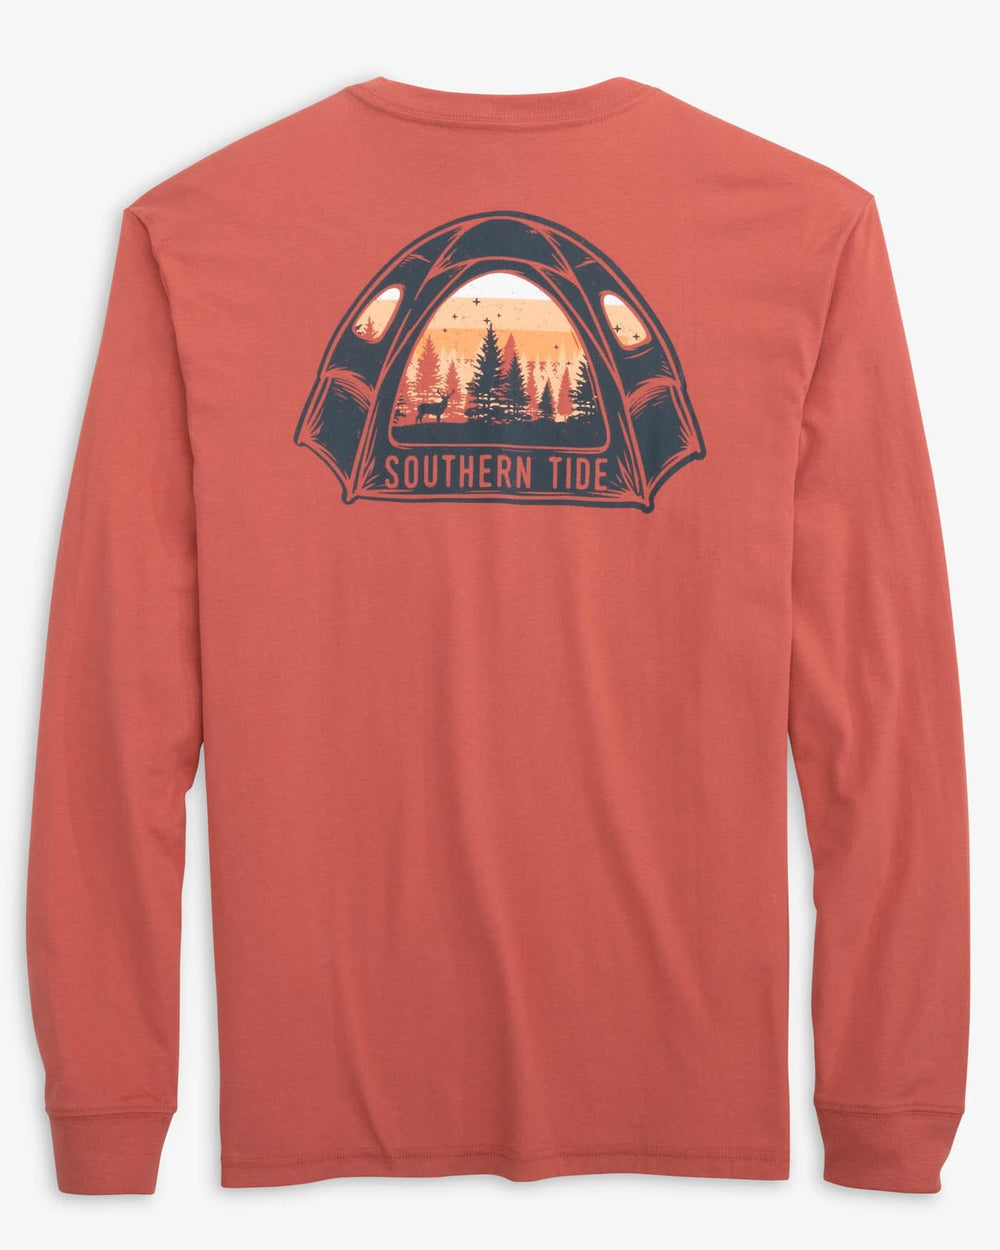 The back view of the Southern Tide Gradient Tent Long Sleeve T-Shirt by Southern Tide - Dusty Coral